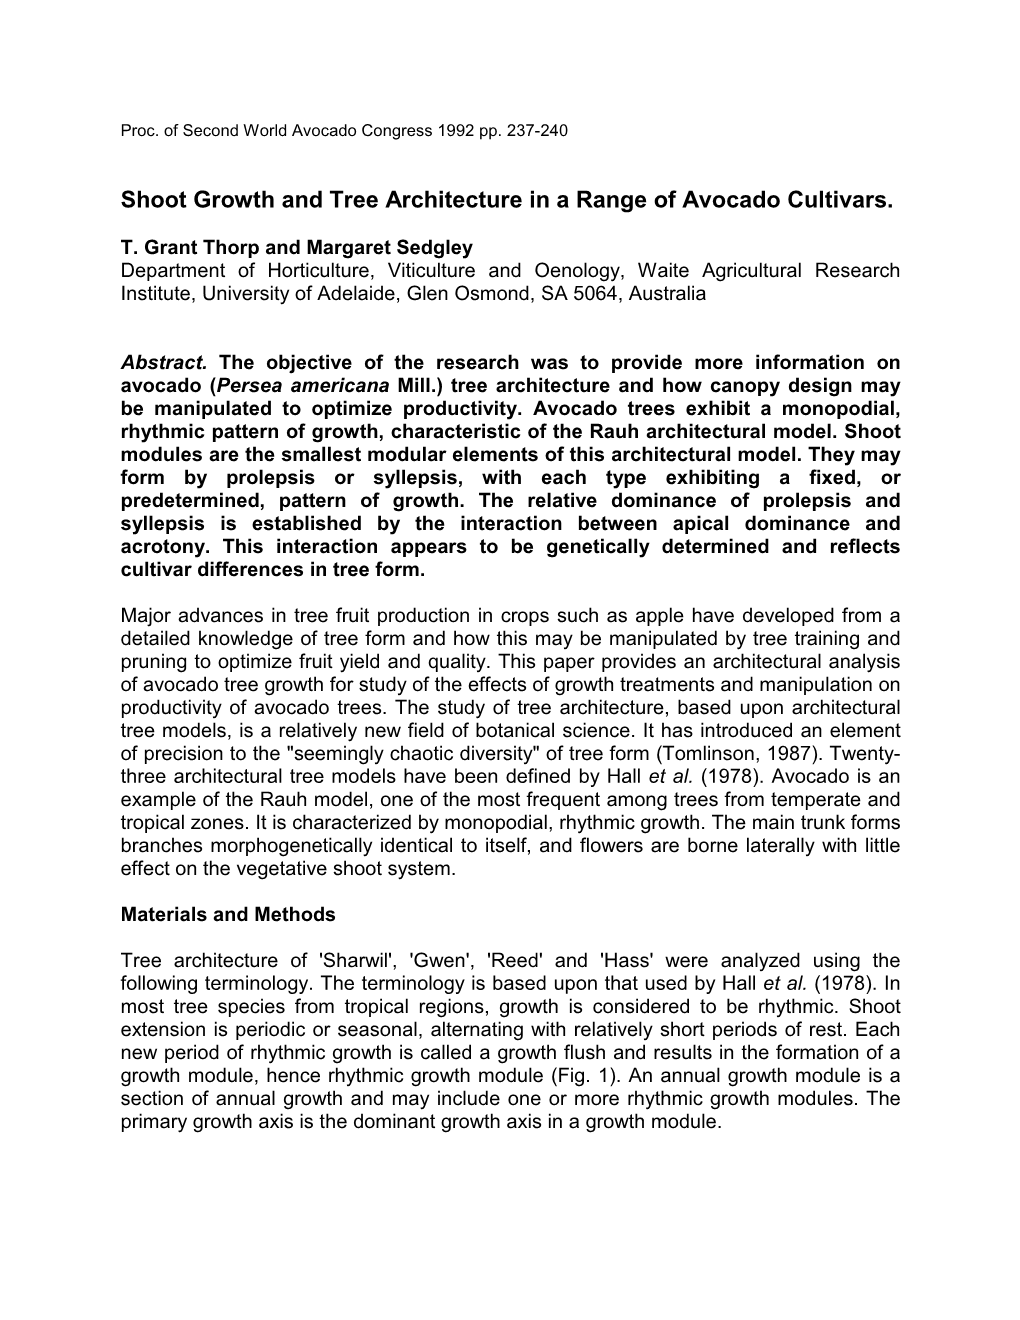 Shoot Growth and Tree Architecture in a Range of Avocado Cultivars